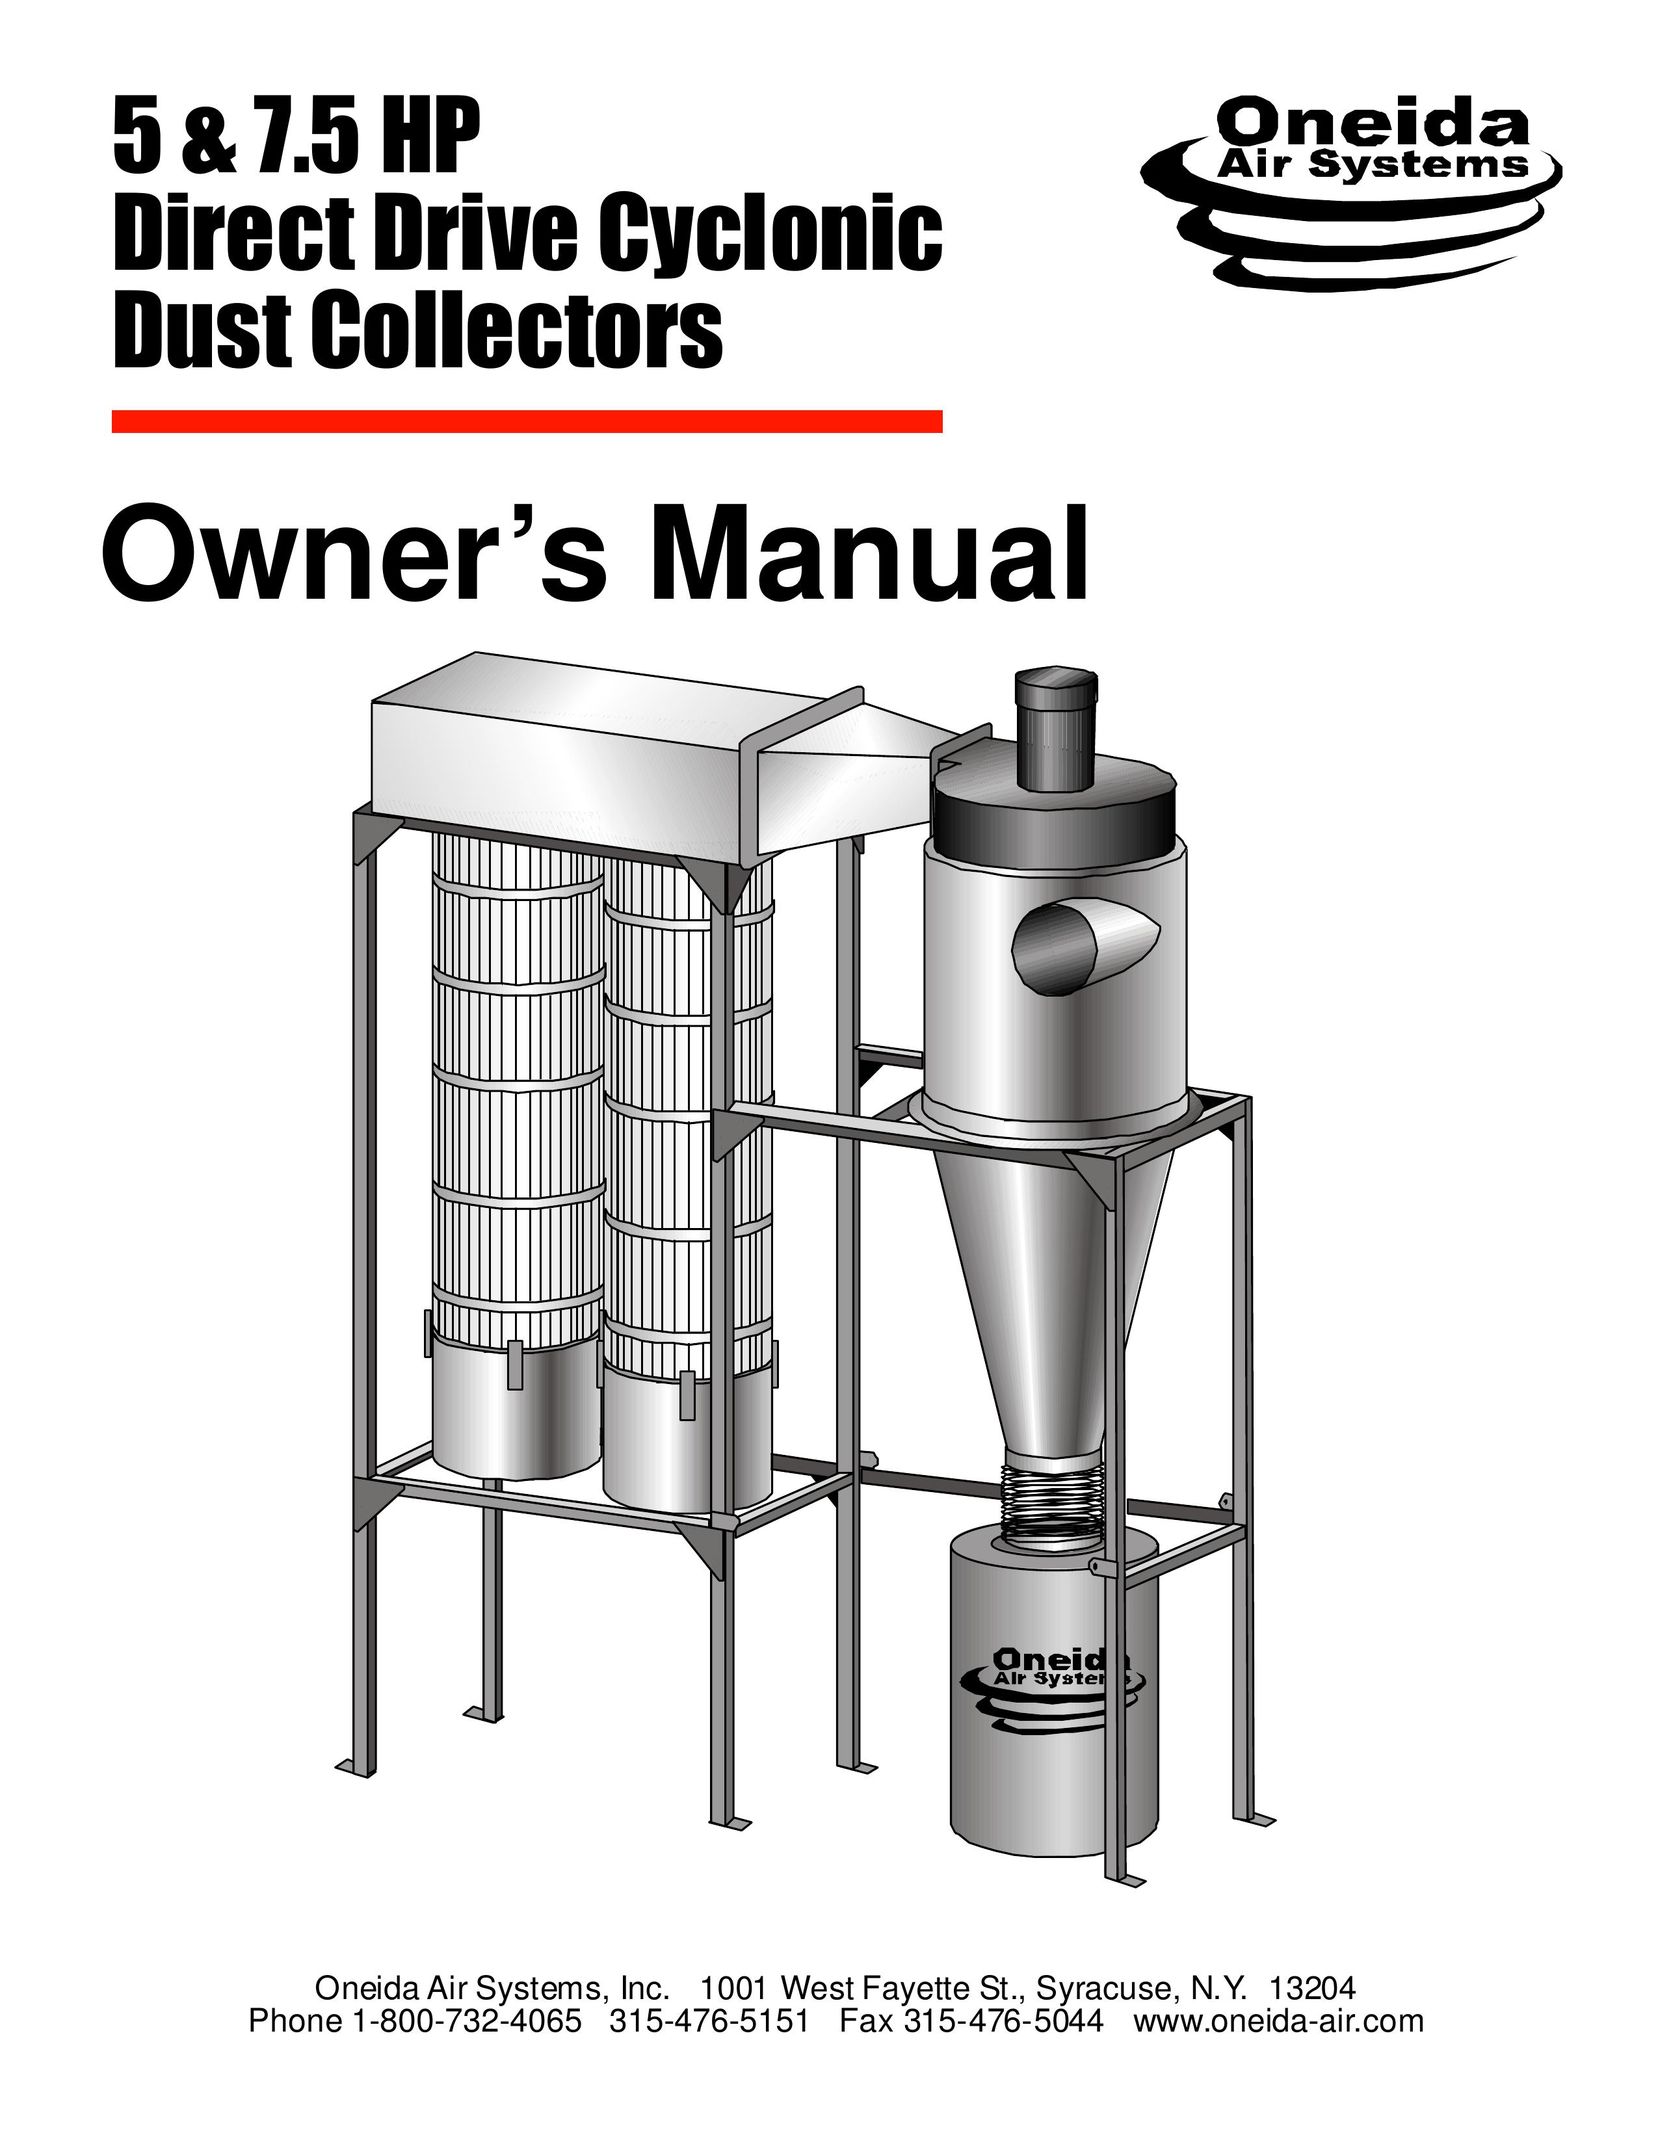 Oneida Air Systems 5 & 7.5 HP Direct Drive Cyclonic Dust Collectors Dust Collector User Manual